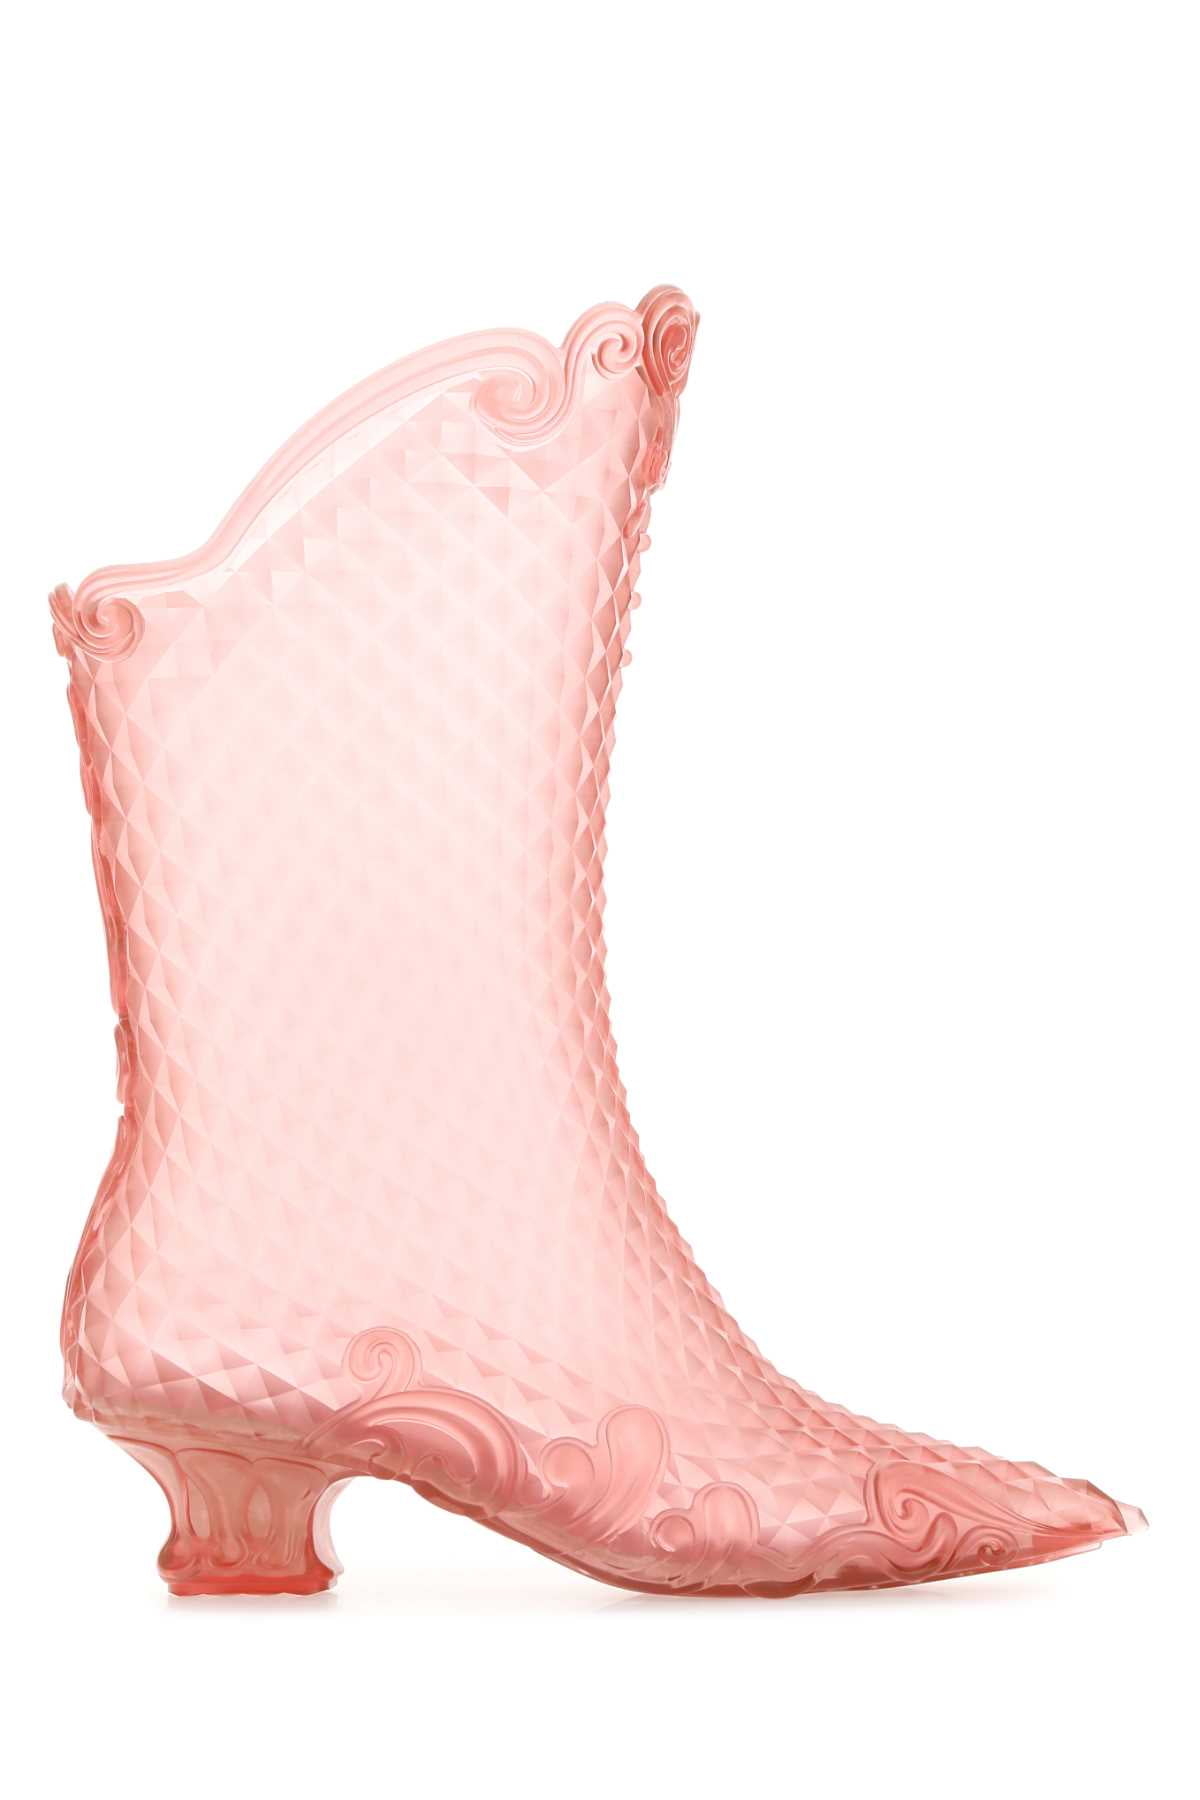 Y Project Woman Pink Pvc Ankle Boots 